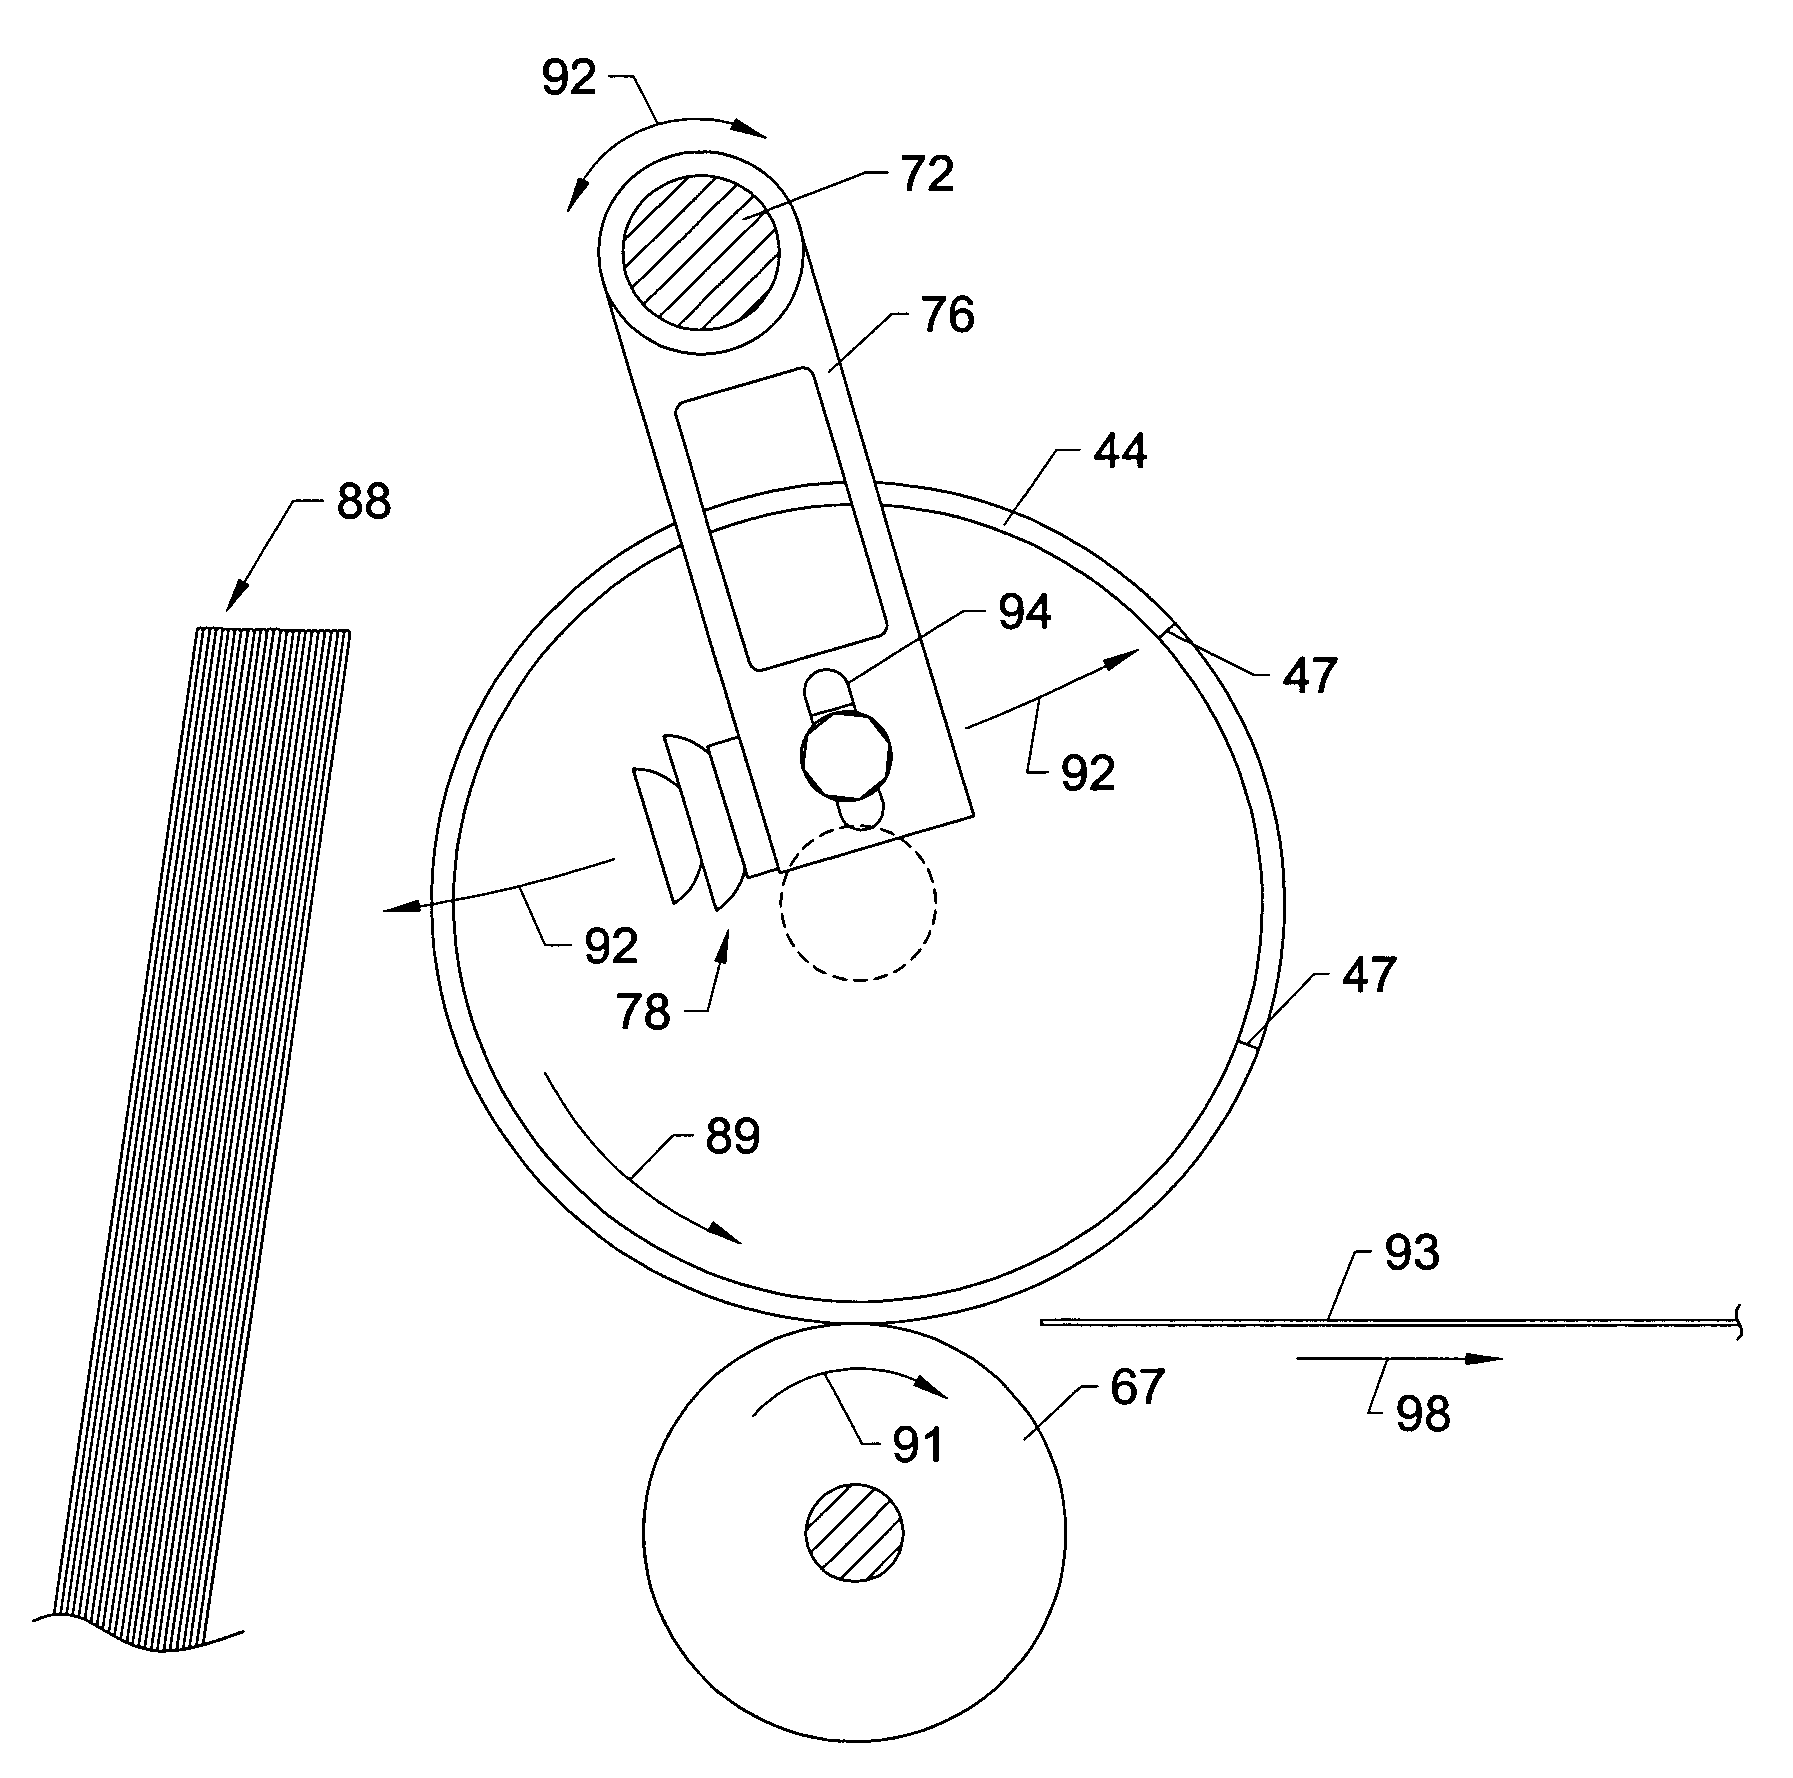 Spaced apart segment wheel assembly for a carton packaging machine